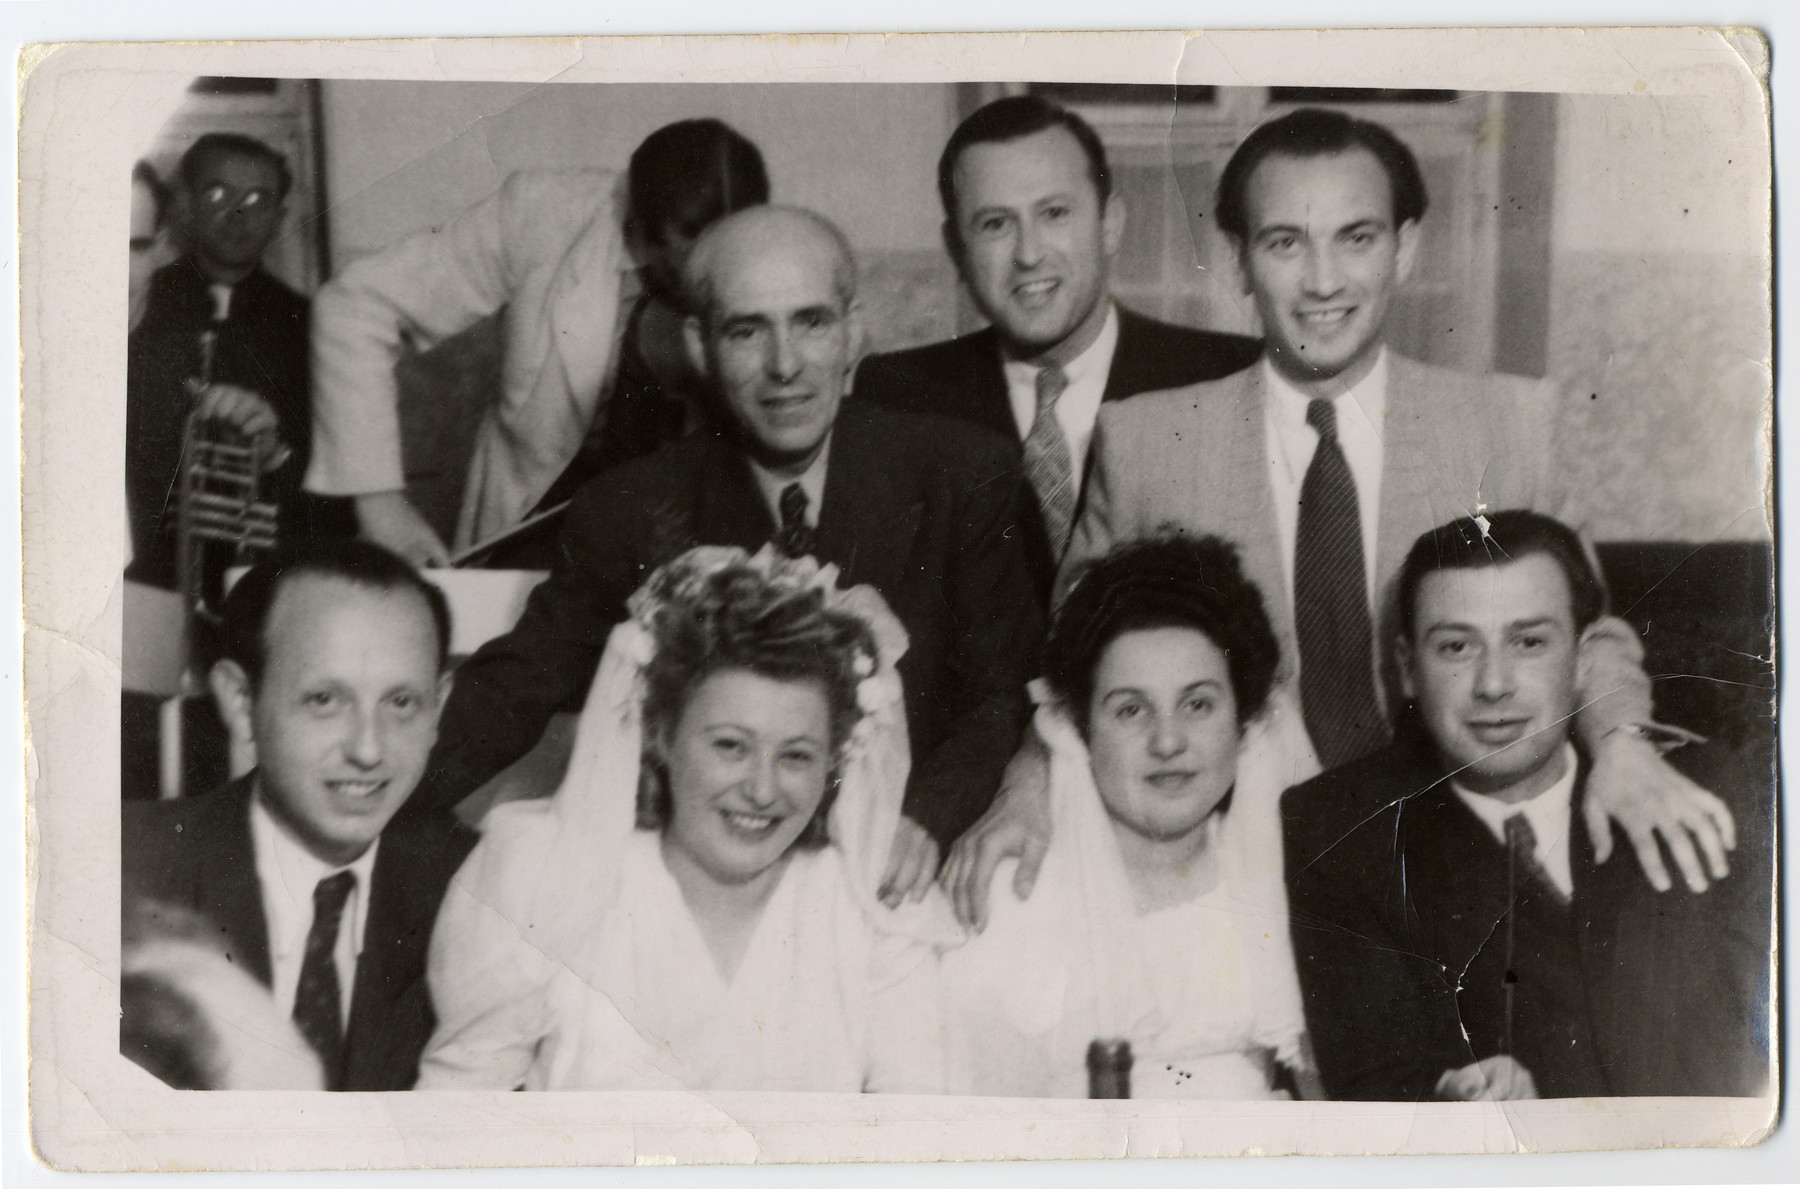 Two young couples celebrate their wedding in the Landsberg displaced persons camp. 

Pictured on the left are Benjamin Jumek Milich and Halina Gozdzik Milich and on the right are Anka Milich Szwarcberg and  Bolek Szwarcberg.  Behind them, on the left, stands Benjamin's stepfather Mozyglod.